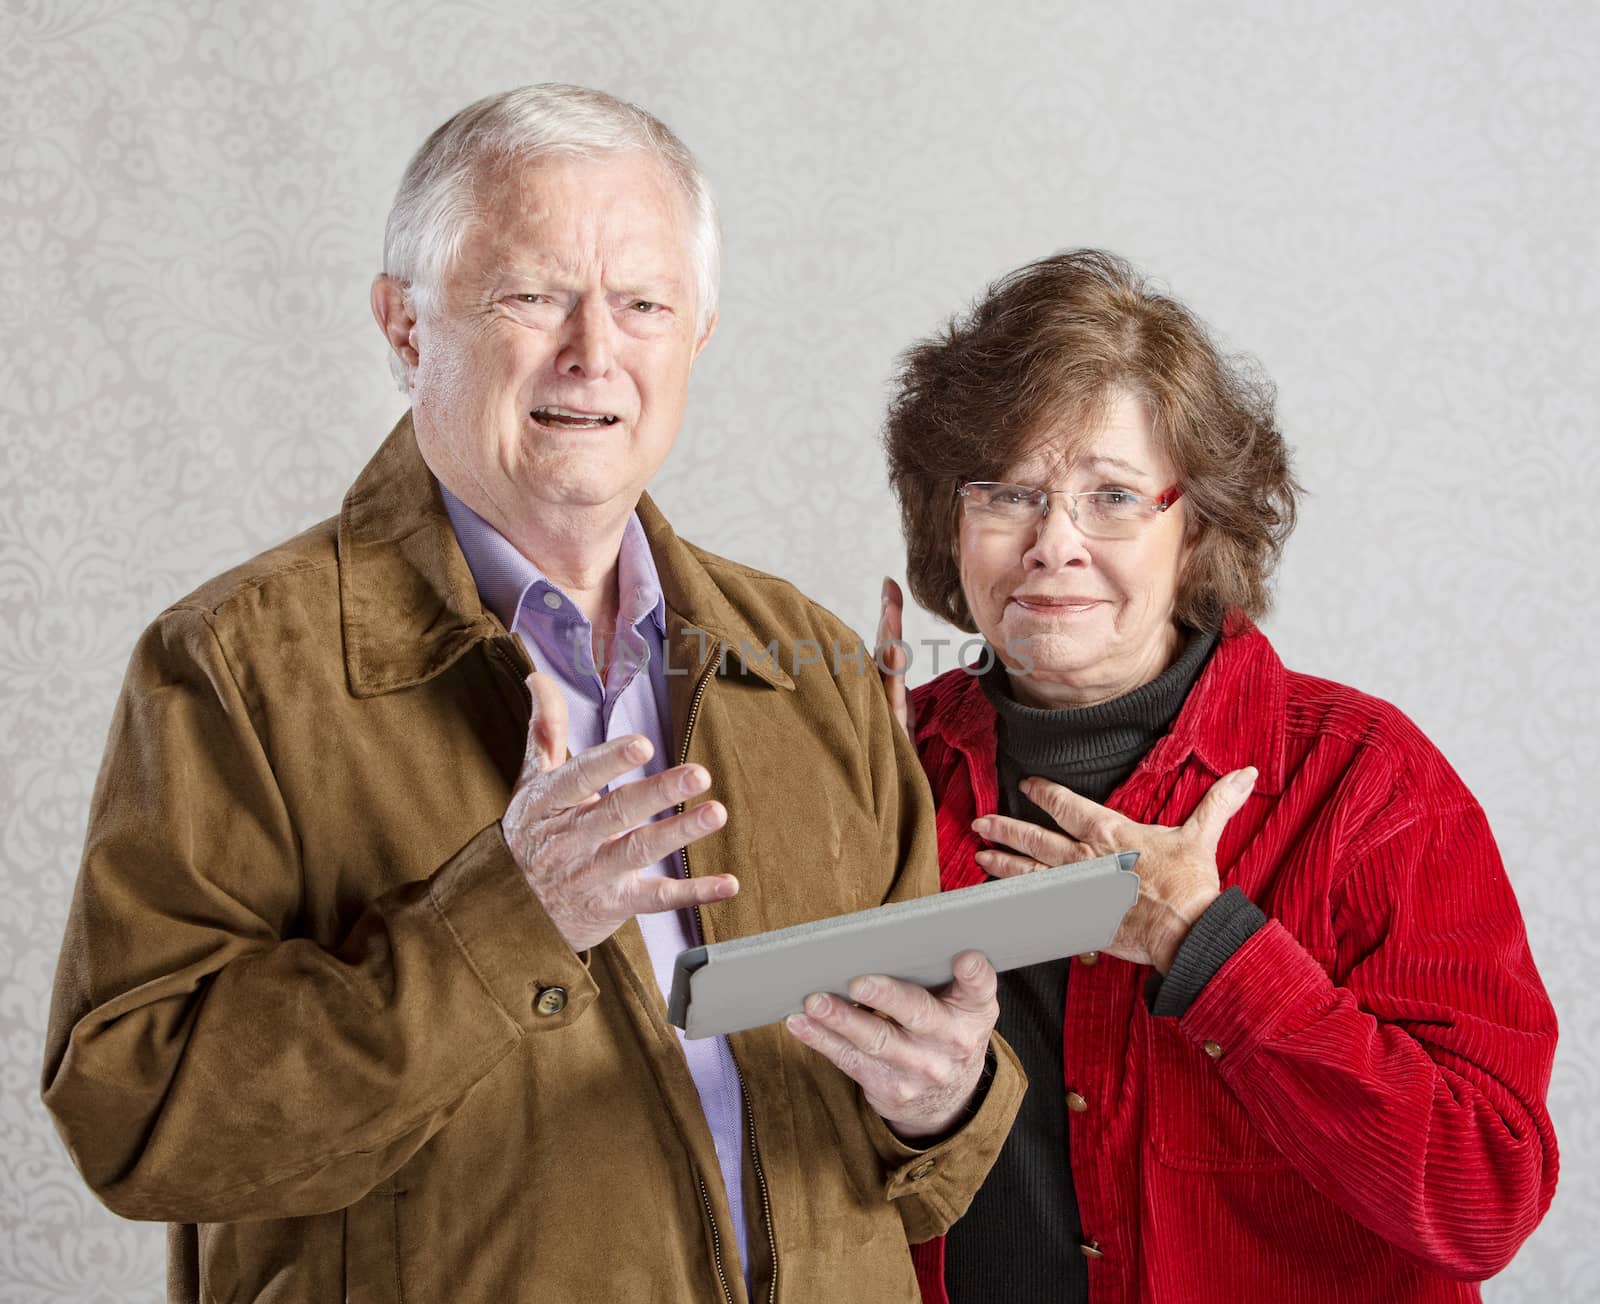 Perplexed man and woman holding computer tablet